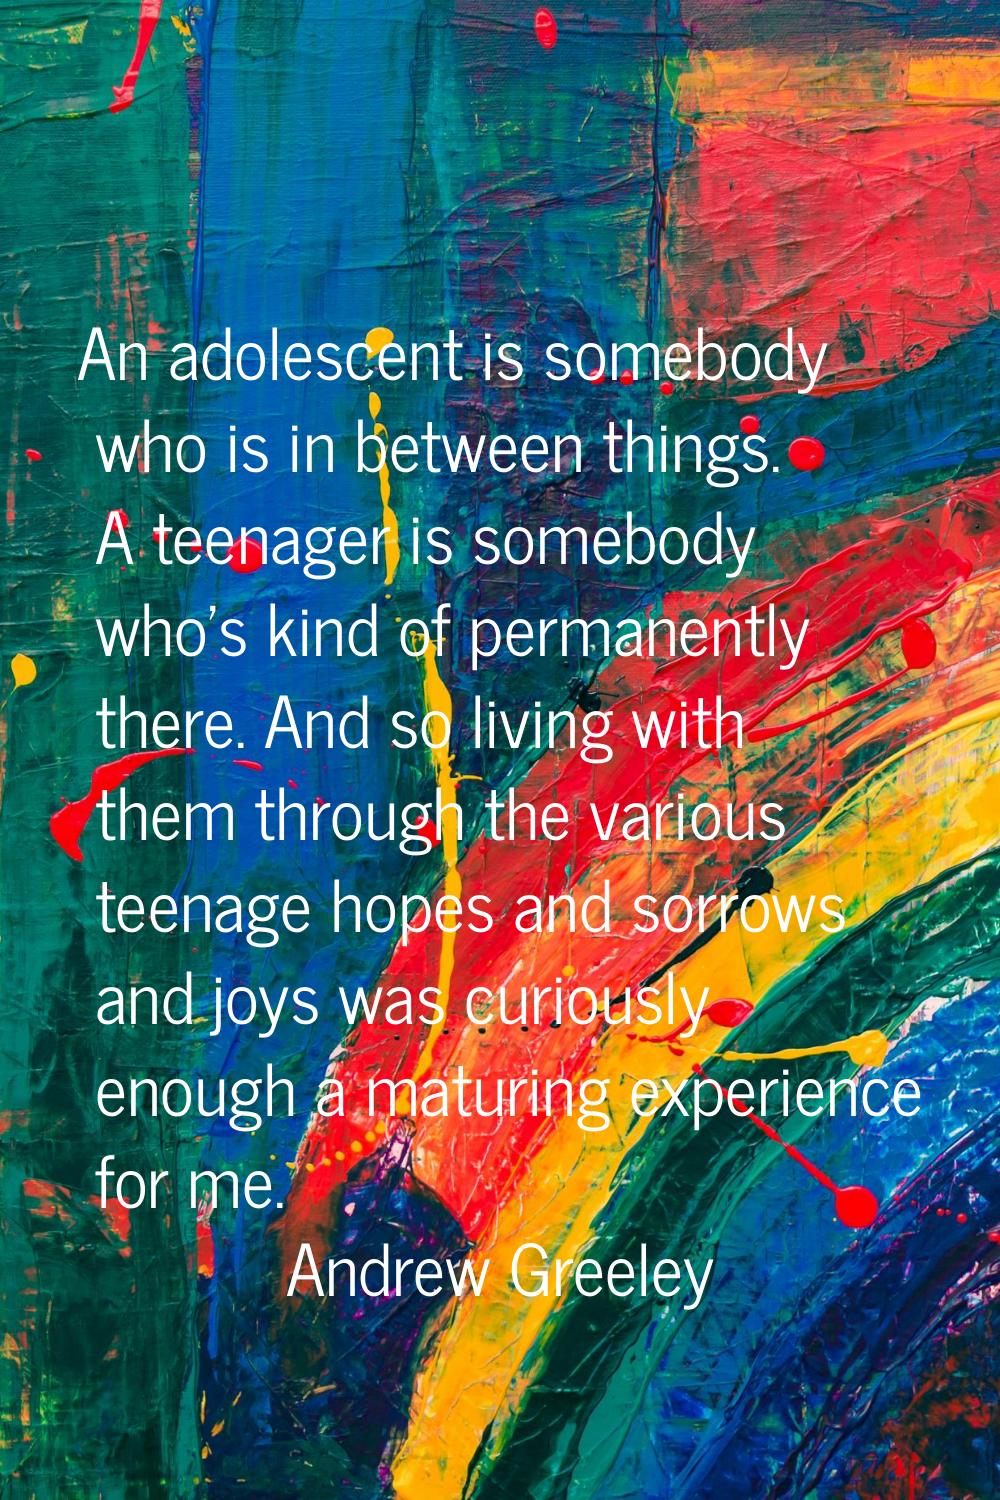 An adolescent is somebody who is in between things. A teenager is somebody who's kind of permanentl